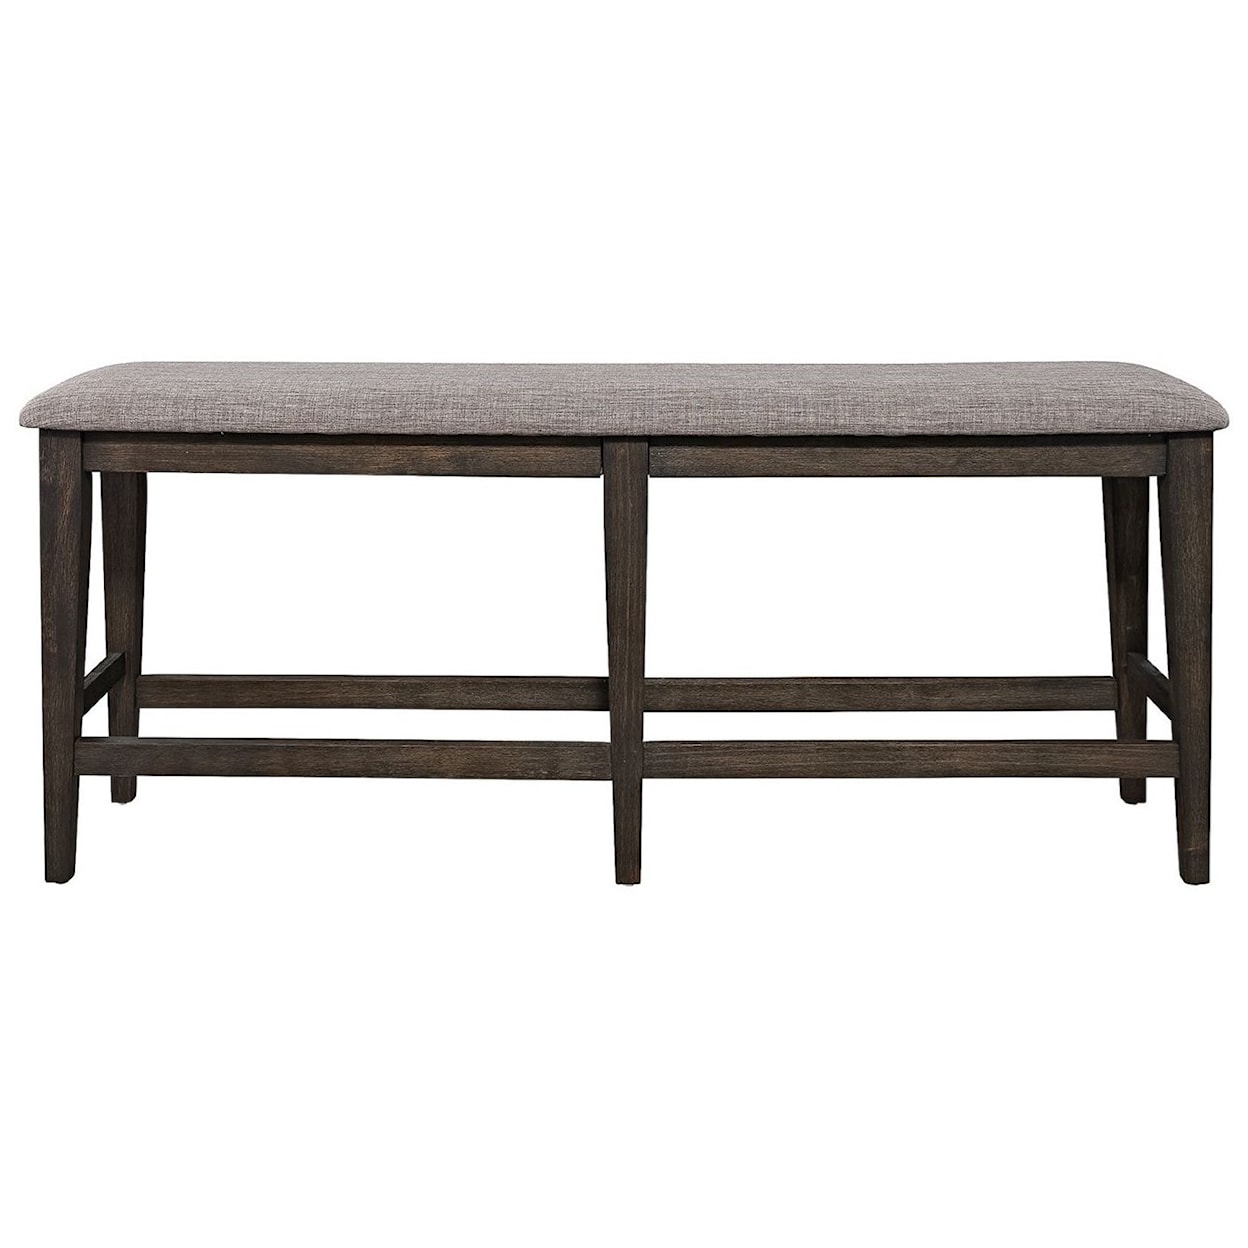 Libby Double Bridge Counter-Height Dining Bench